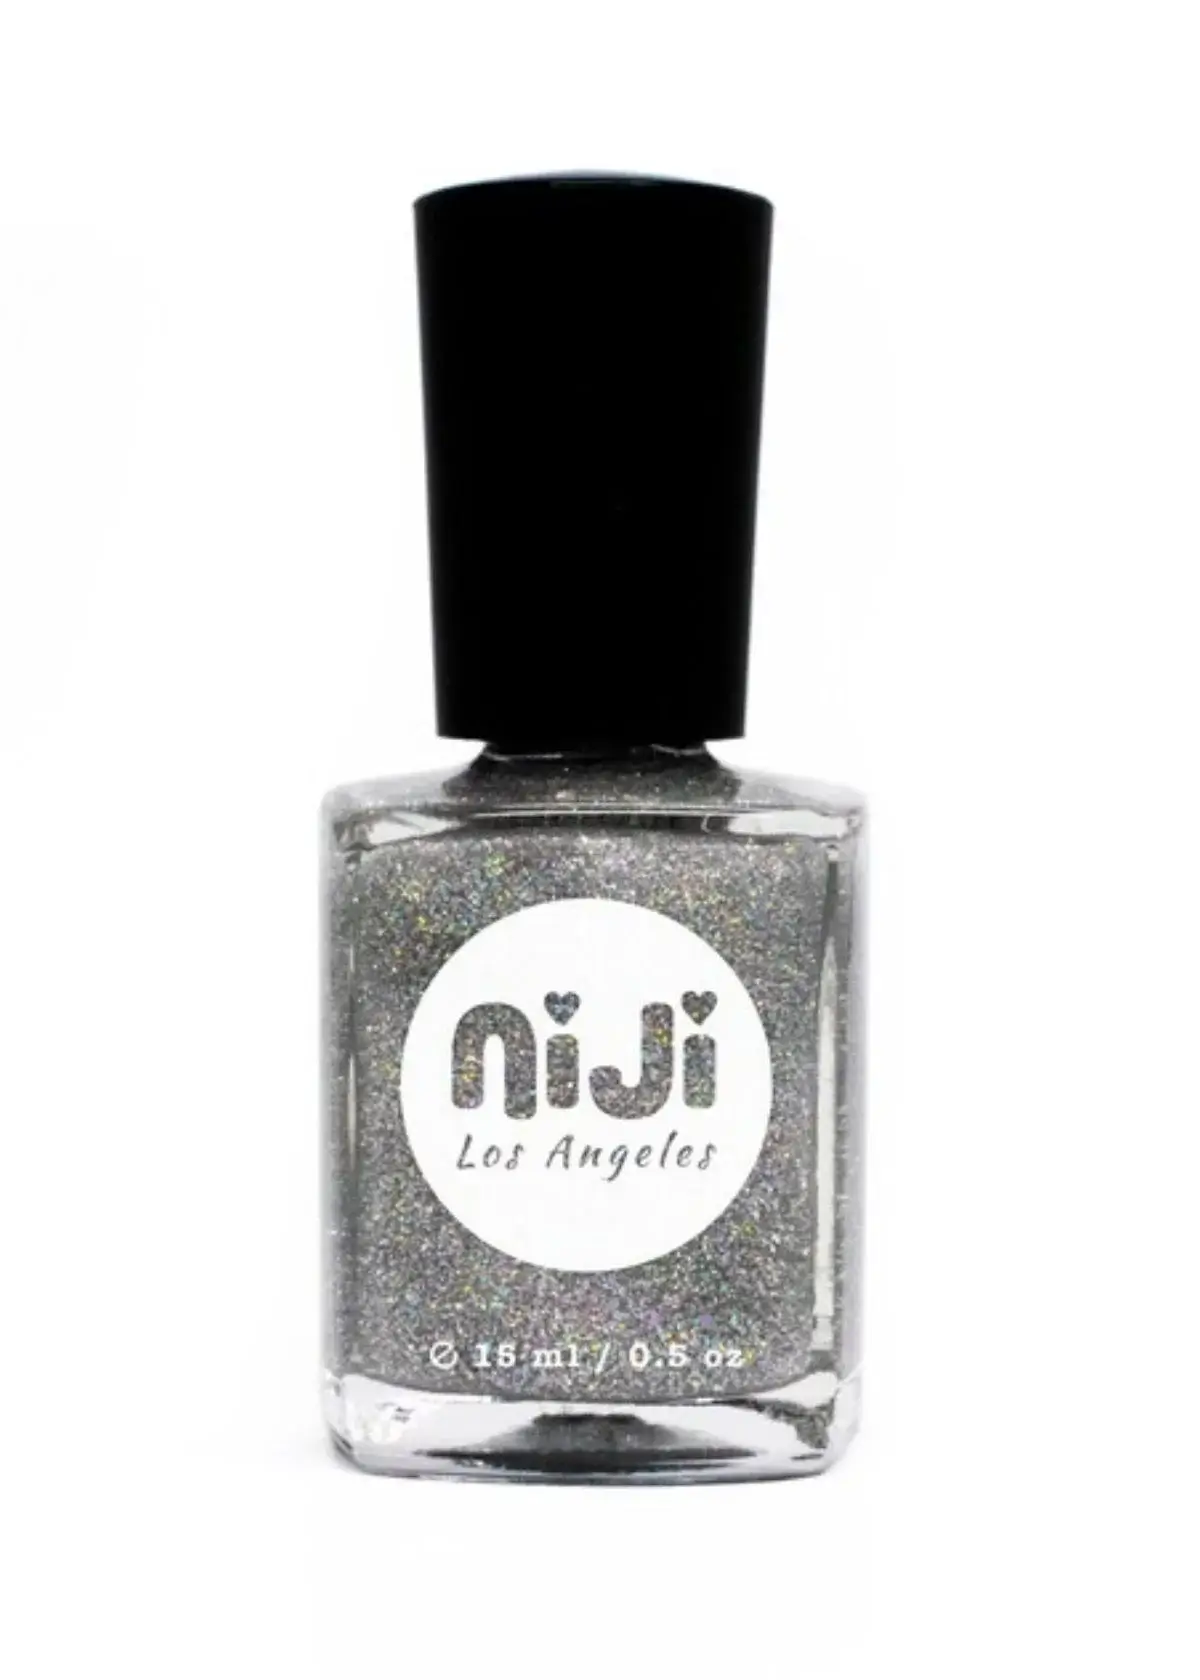 What is holographic nail polish?